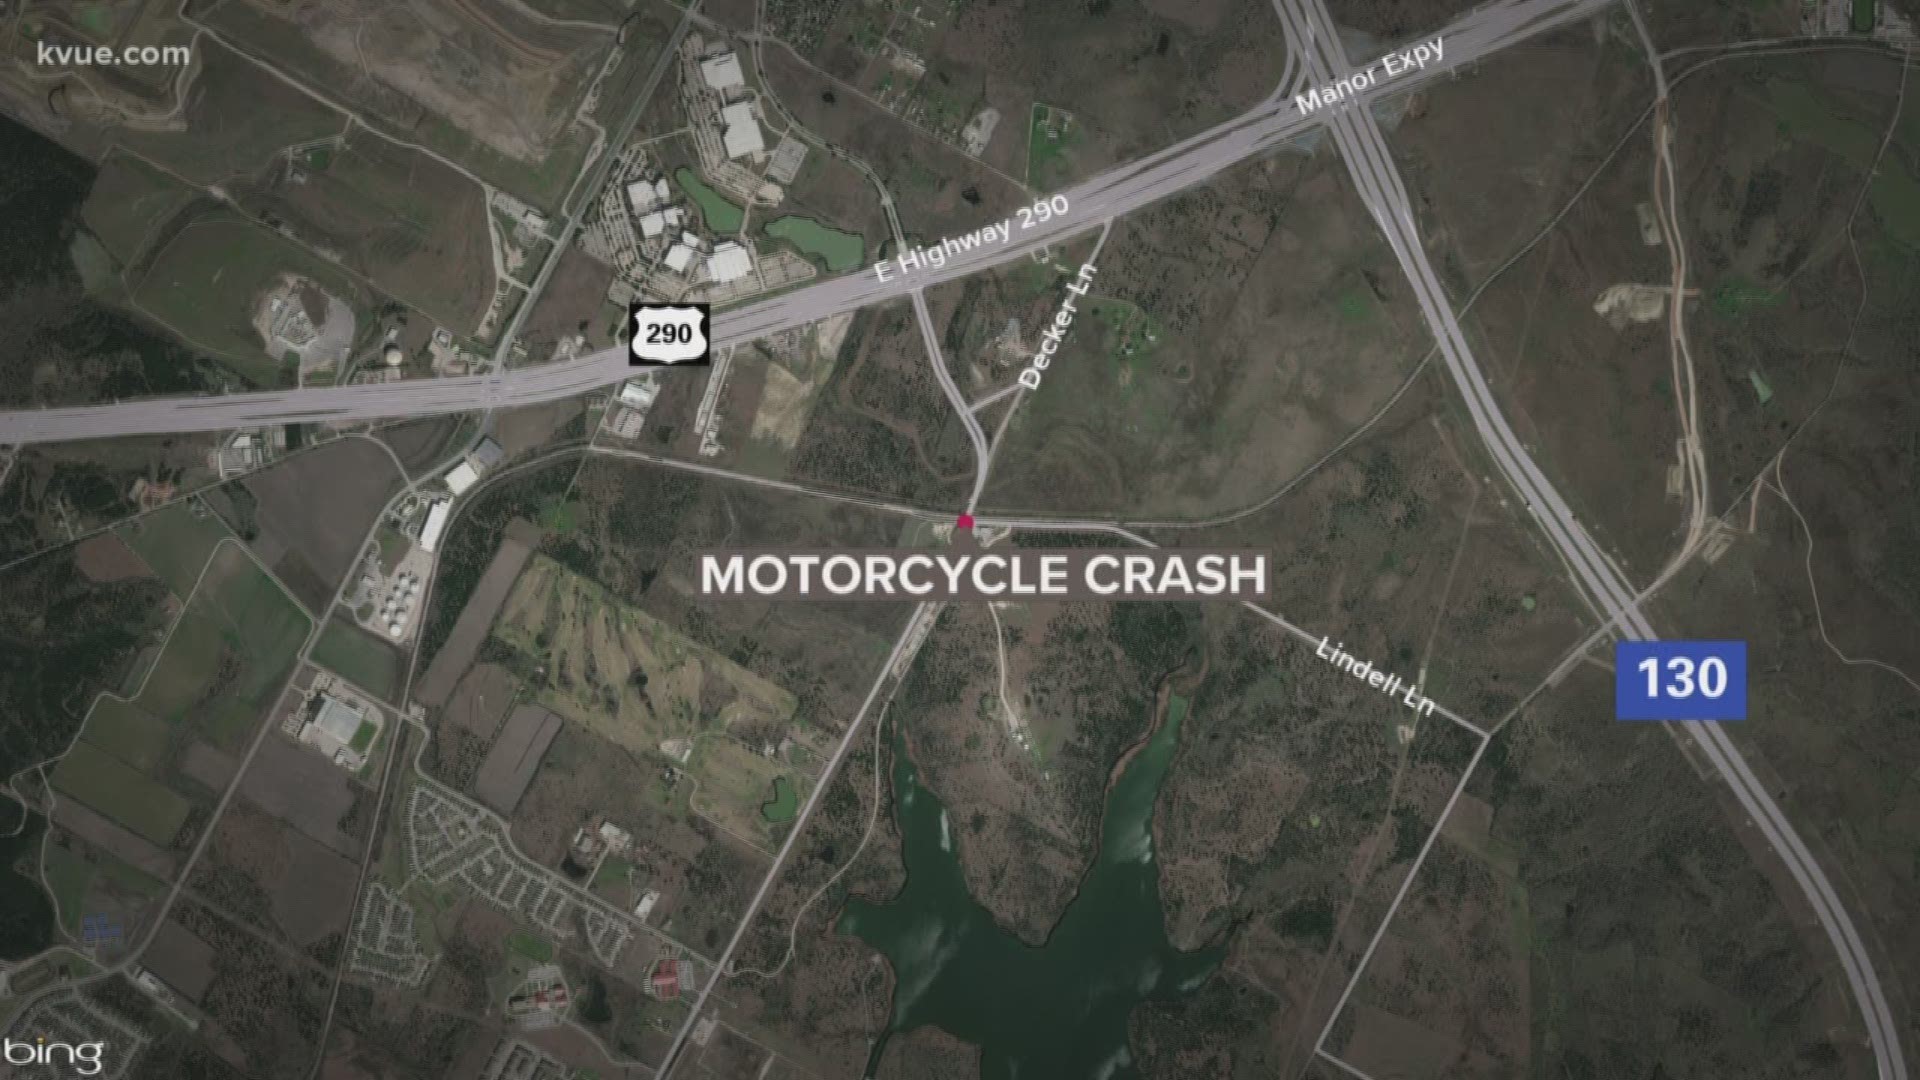 Three people are in the hospital after a crash between a motorcycle and a vehicle in East Austin on Sunday.